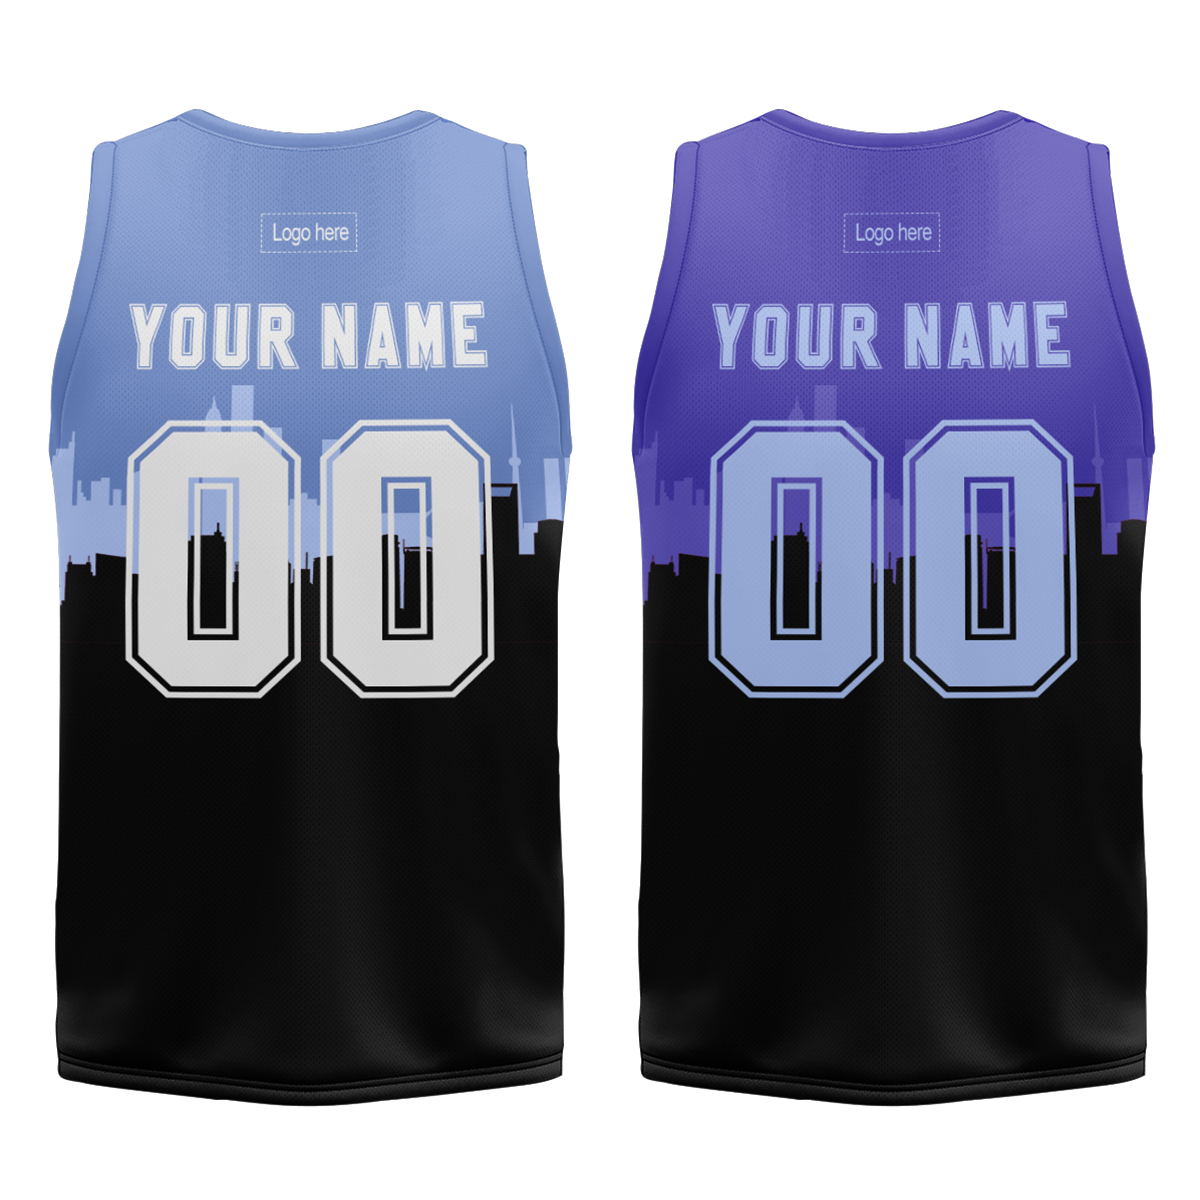 new-design-sublimation-basketball-jersey-uniform-for-teenager-and-adult-with-custom-logo-at-cj-pod-6